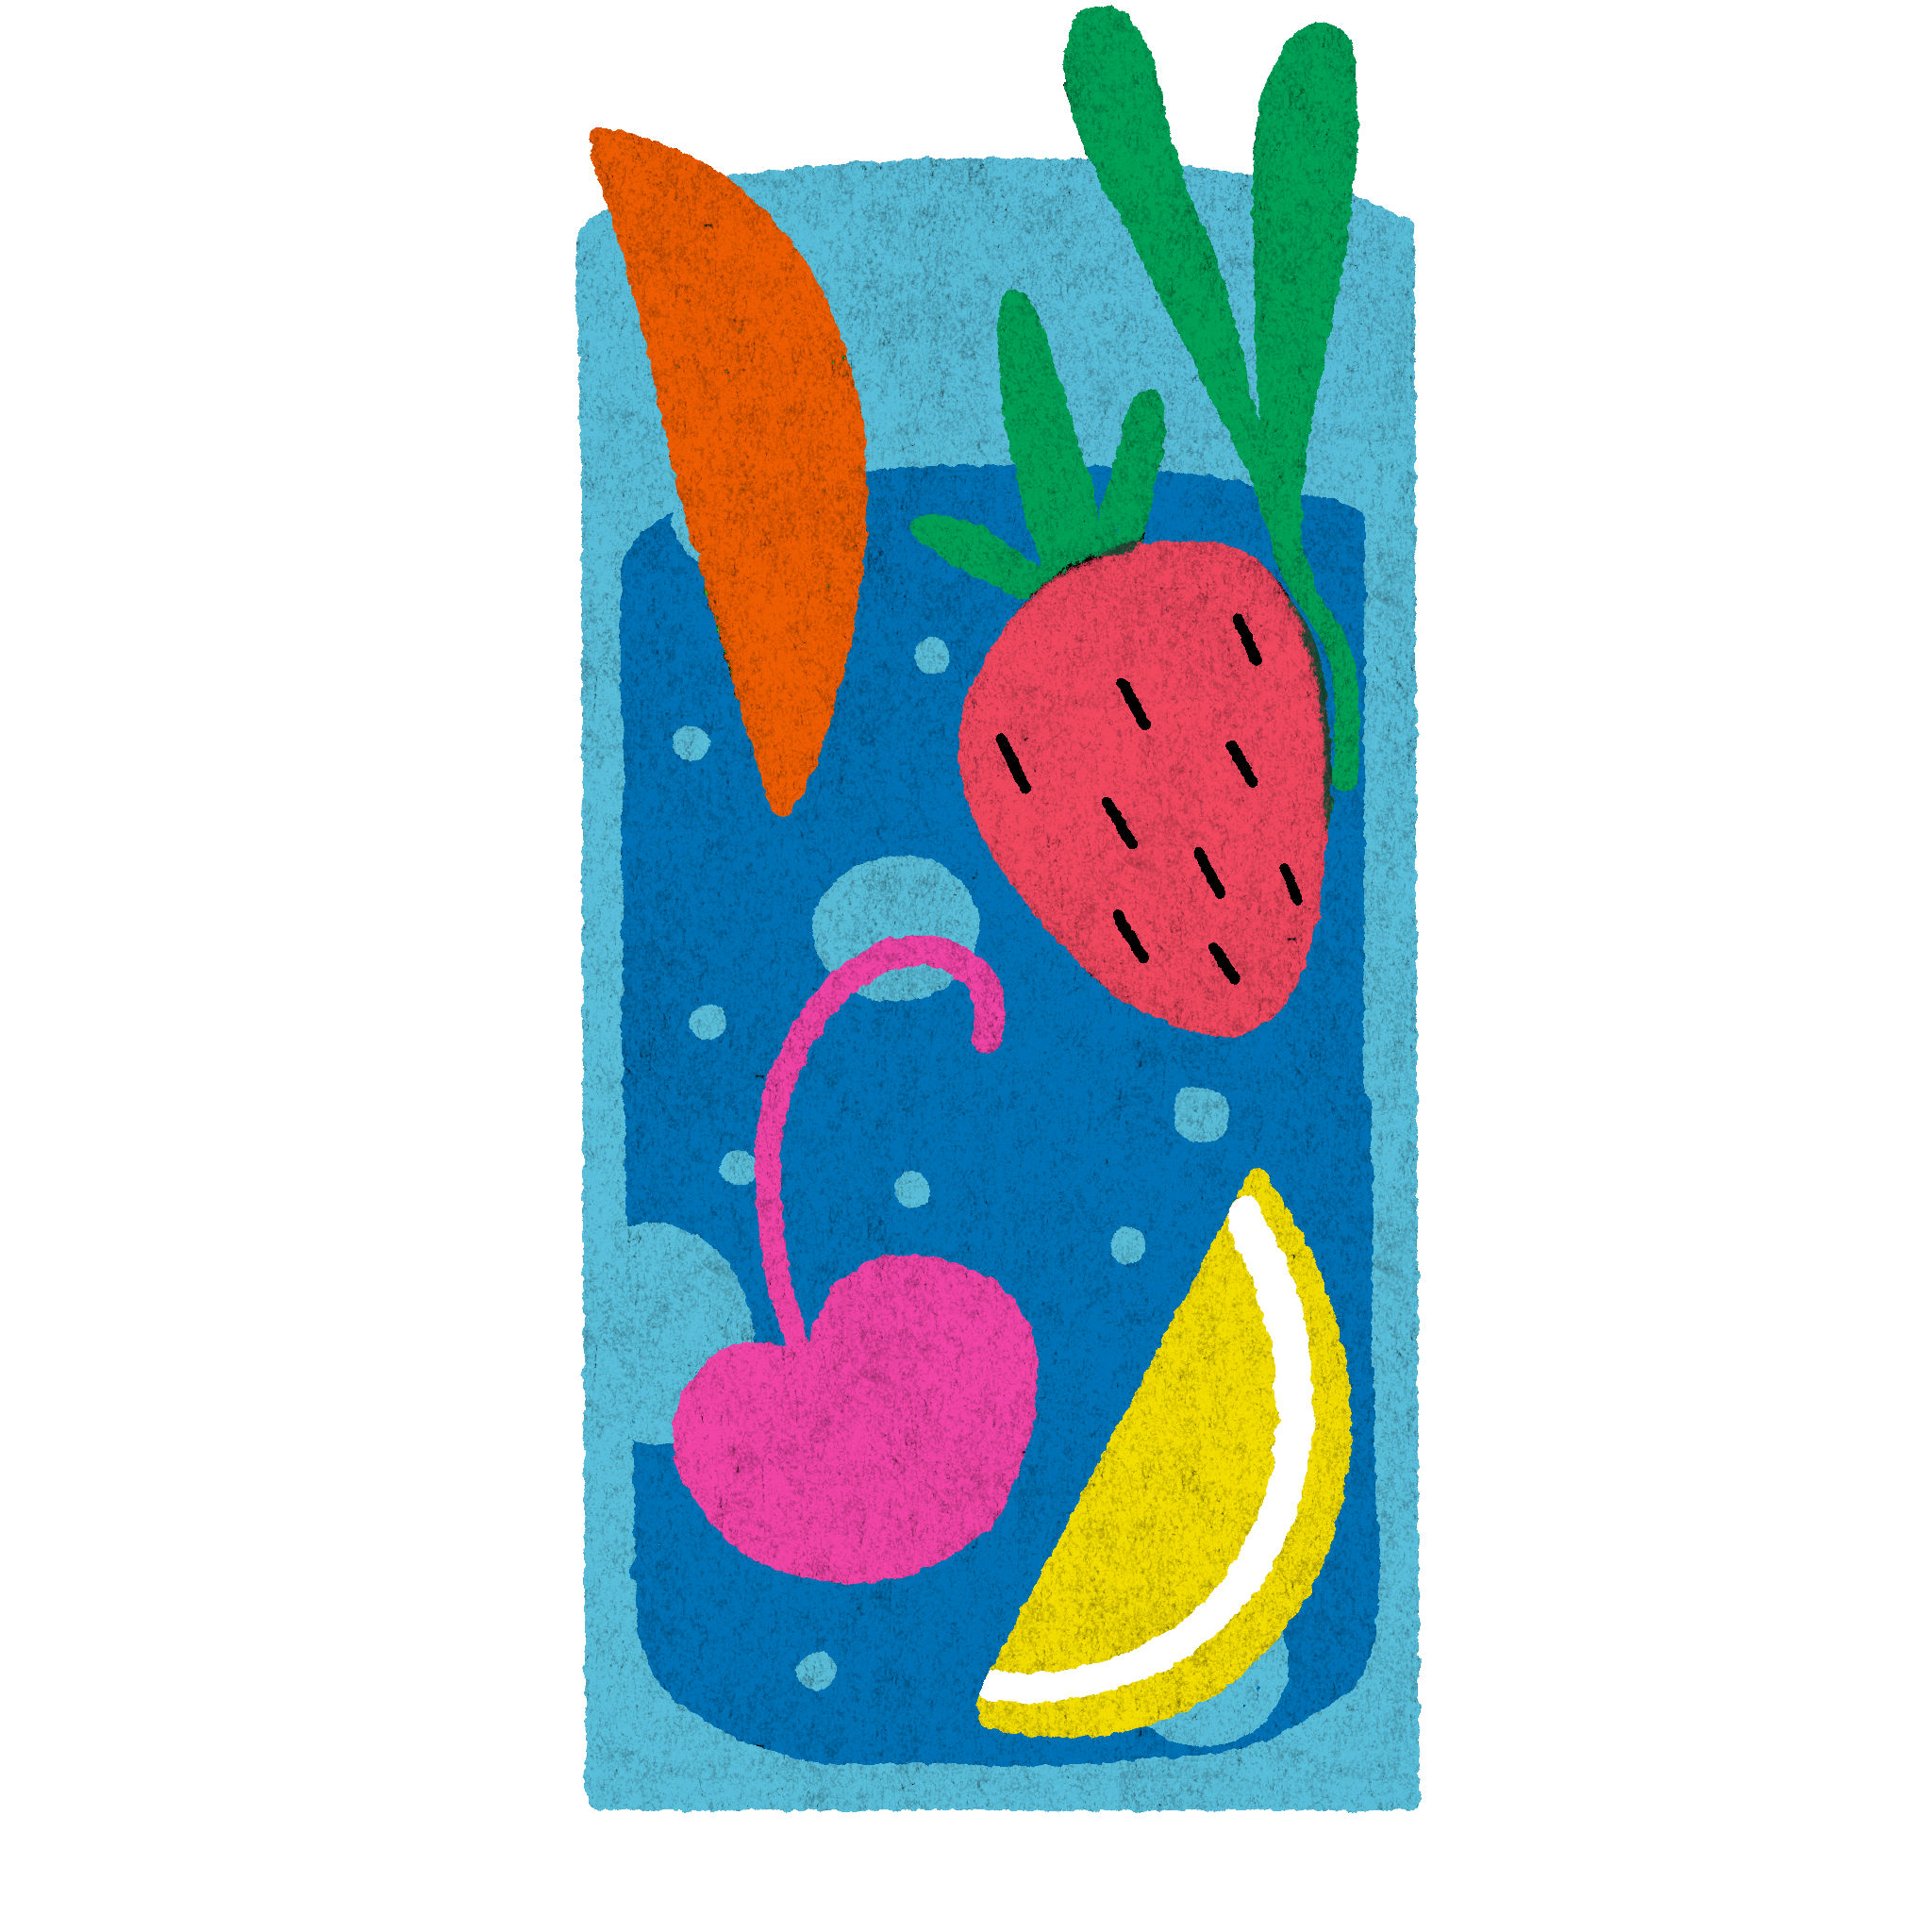 Illustration of a glass of seltzer with fruit in it